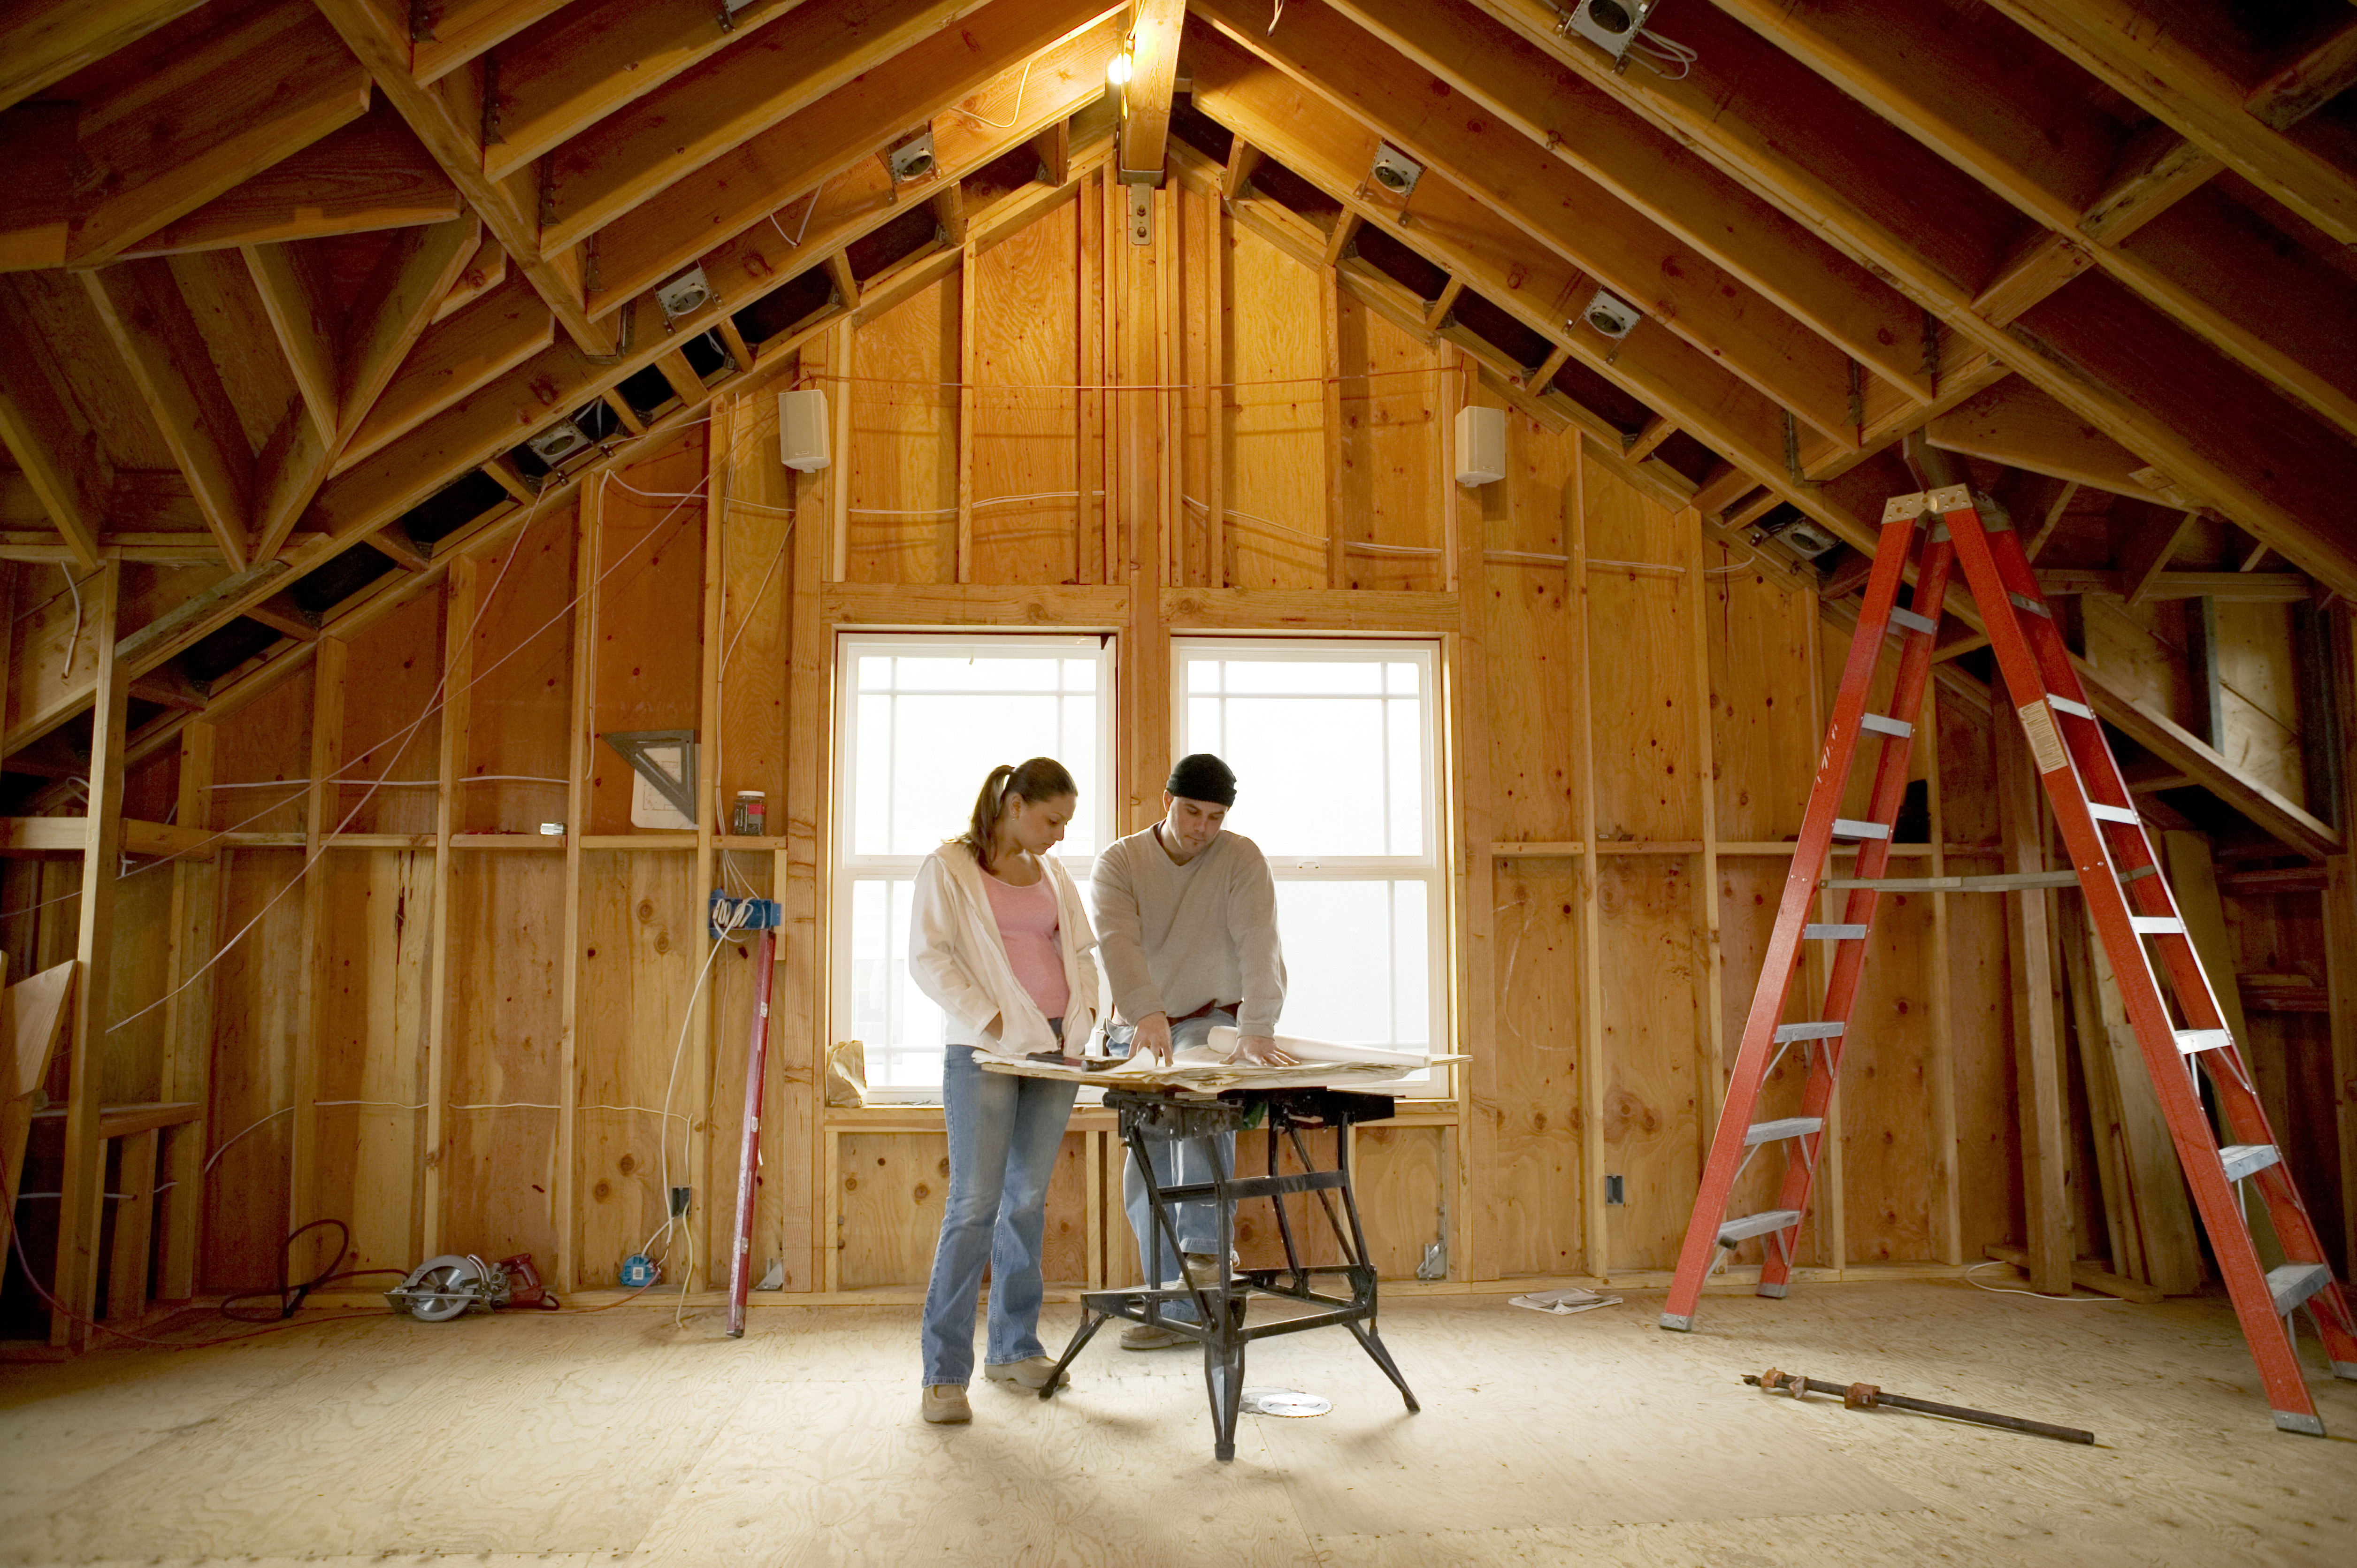 Personal loan vs. home equity loan: Which is best for home improvement?